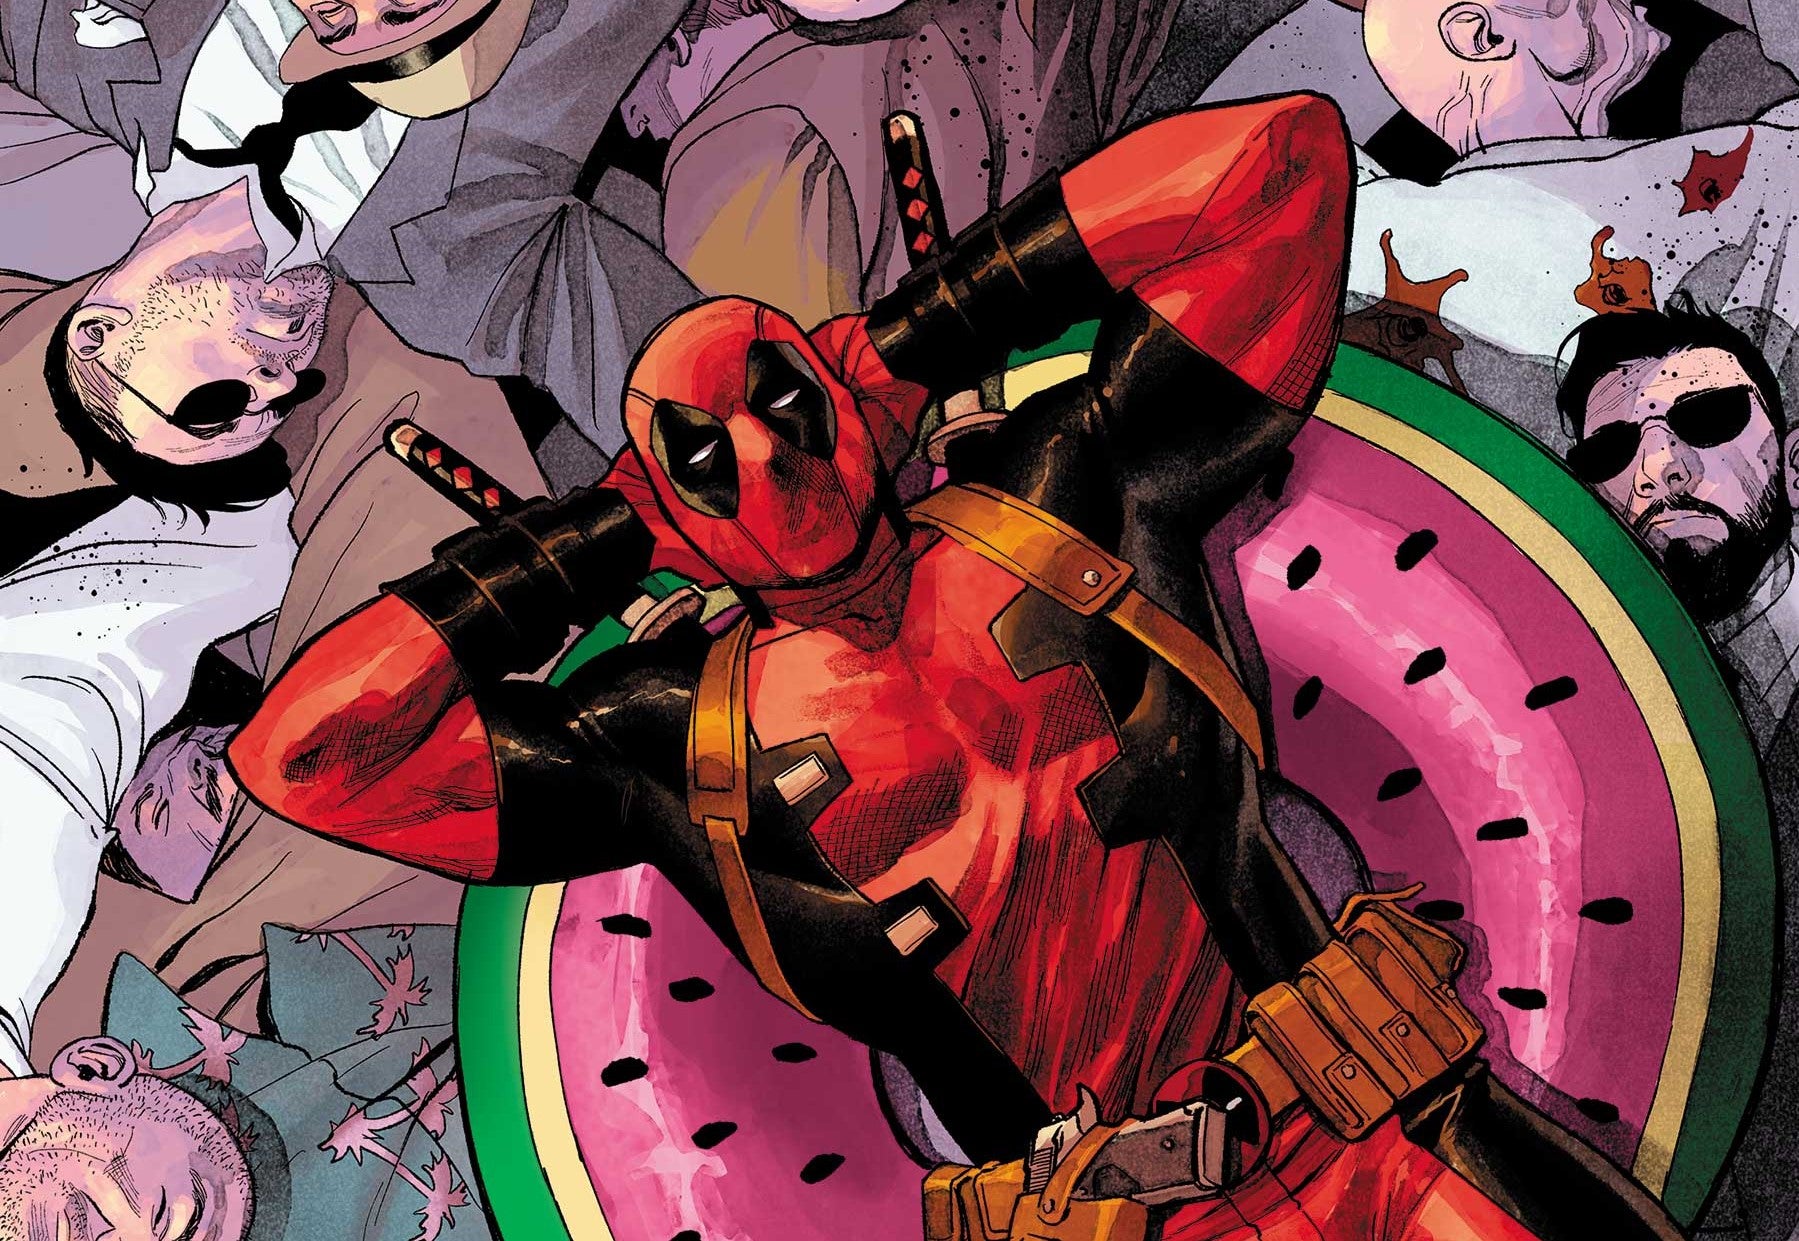 Deadpool relaxing on a watermelon floating device over a sea of what looks like dead bodies